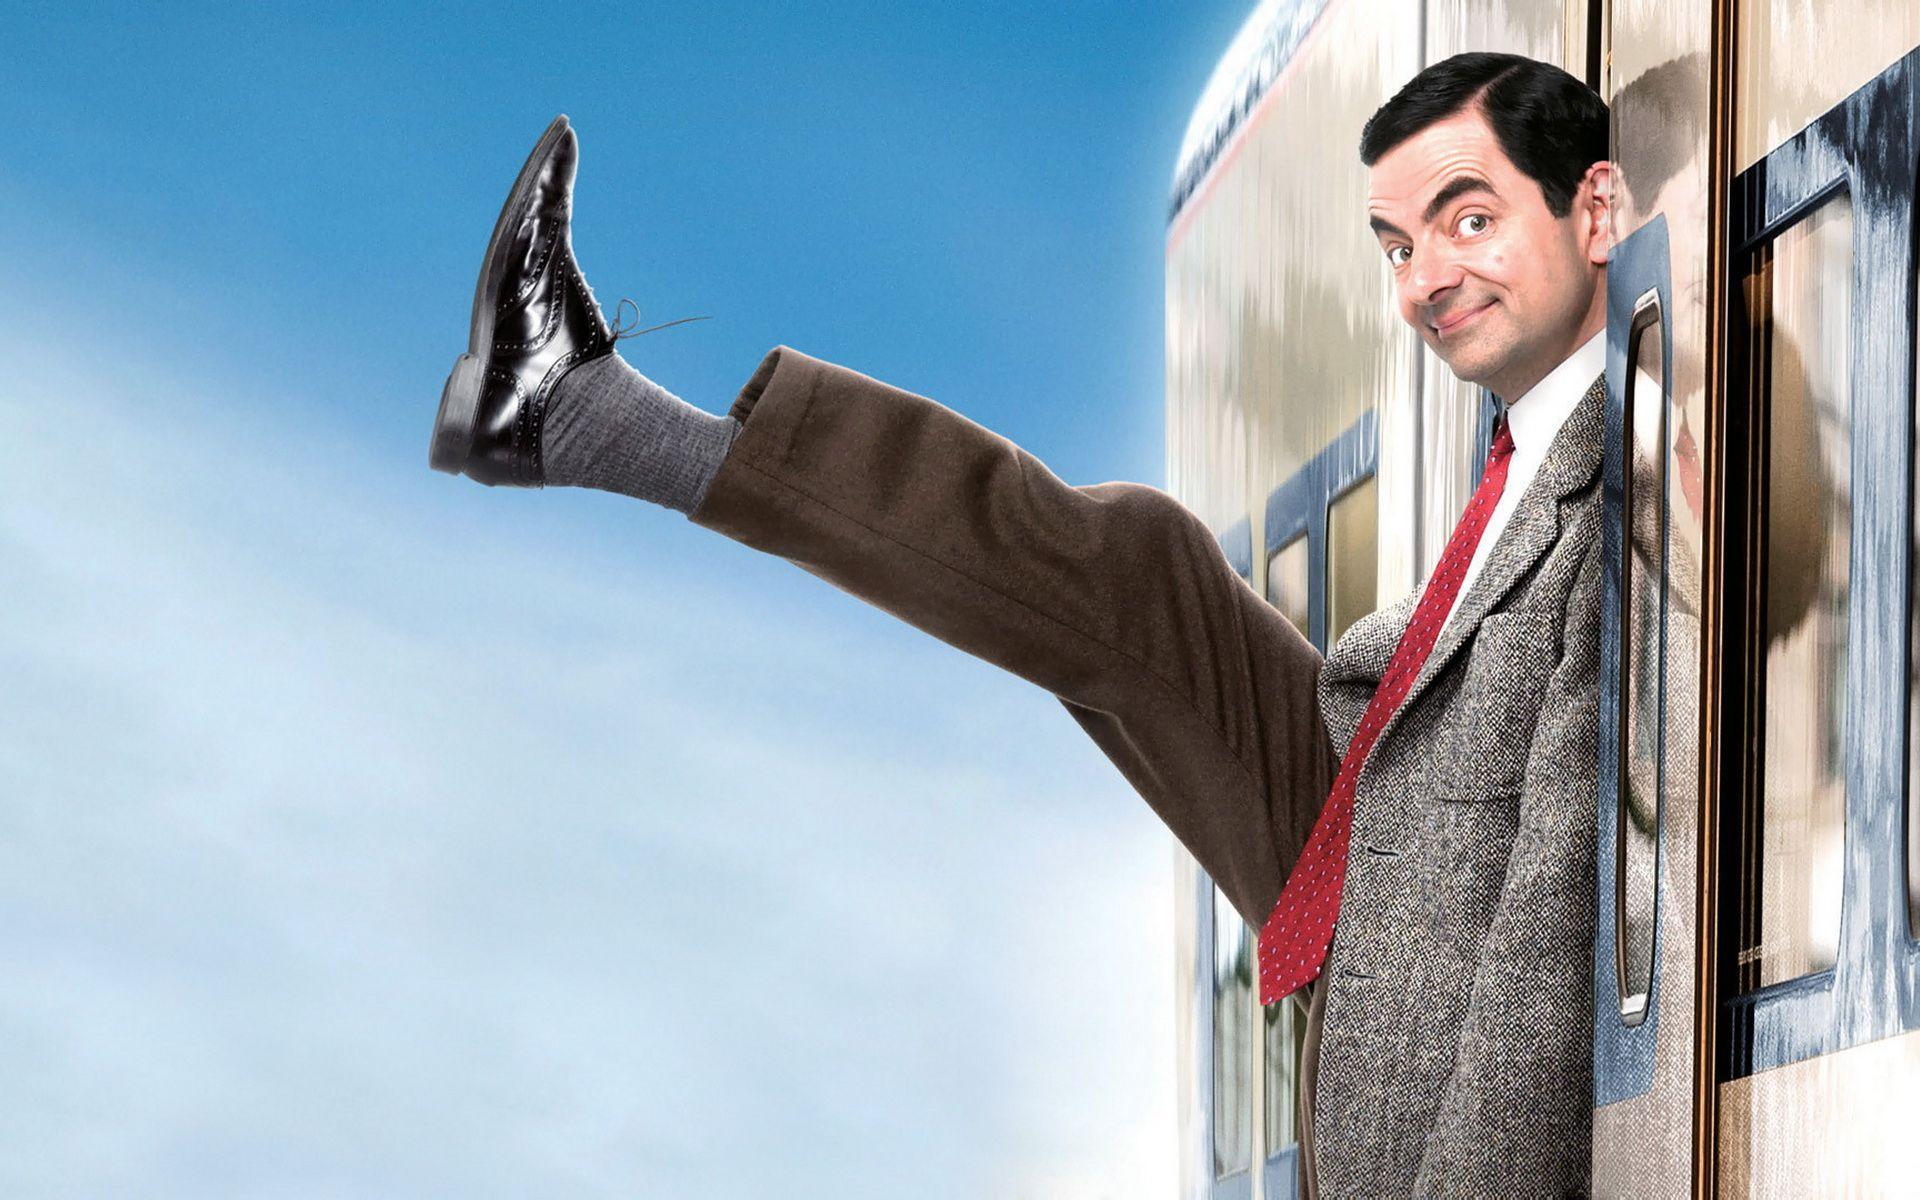  Mr Bean Wallpaper  Wallpapers and Backrounds for your Phone or  iPhone  Mr bean cartoon Mr bean wallpaper Mr bean